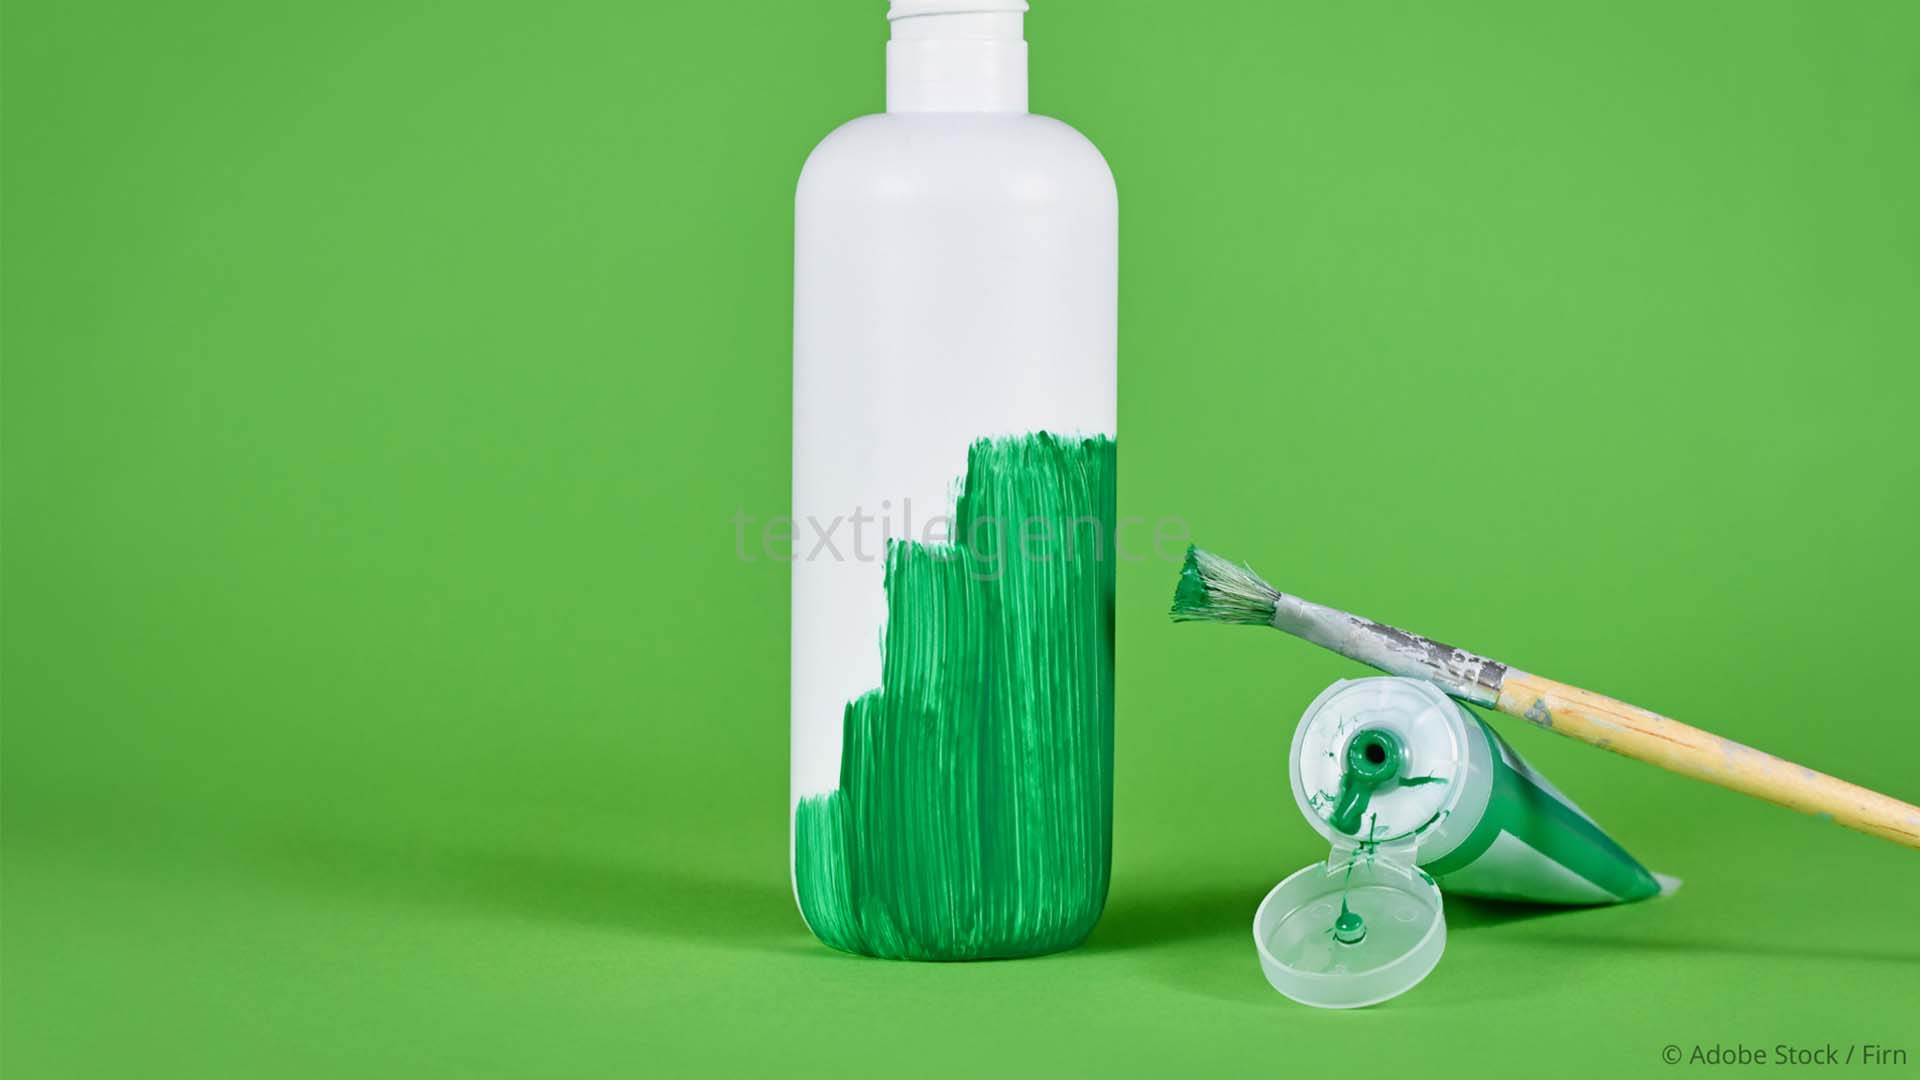 Members of the European Parliament adopted a new law banning greenwashing and misleading product information   Image Source: © Firn / Adobe Stock